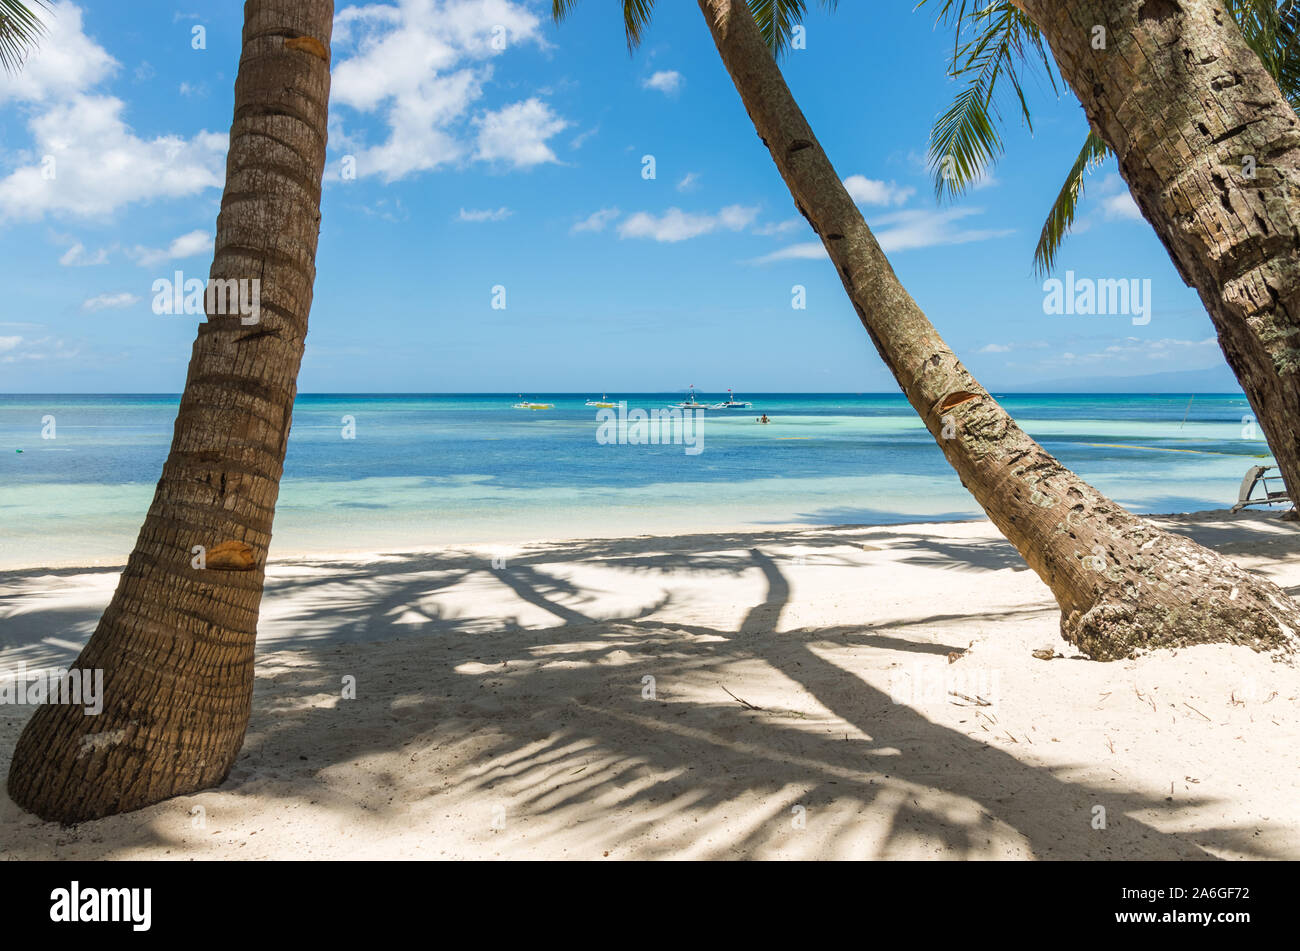 White beach, palm trees and turquoise sea in San Juan, SIQUIJOR ISLAND, Philippines. Stock Photo